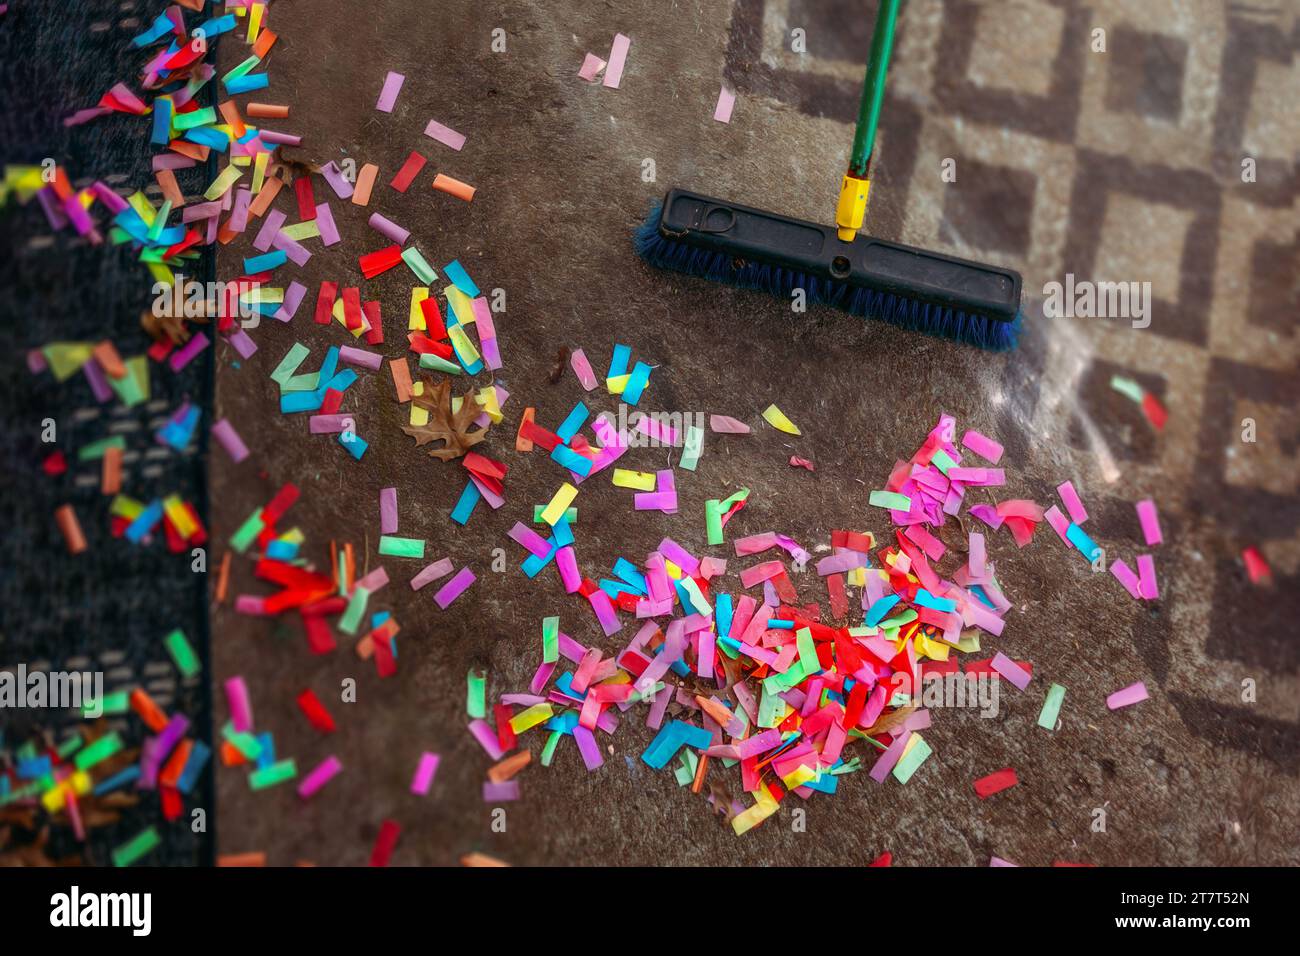 Broom cleaning up confetti from ground outside Stock Photo